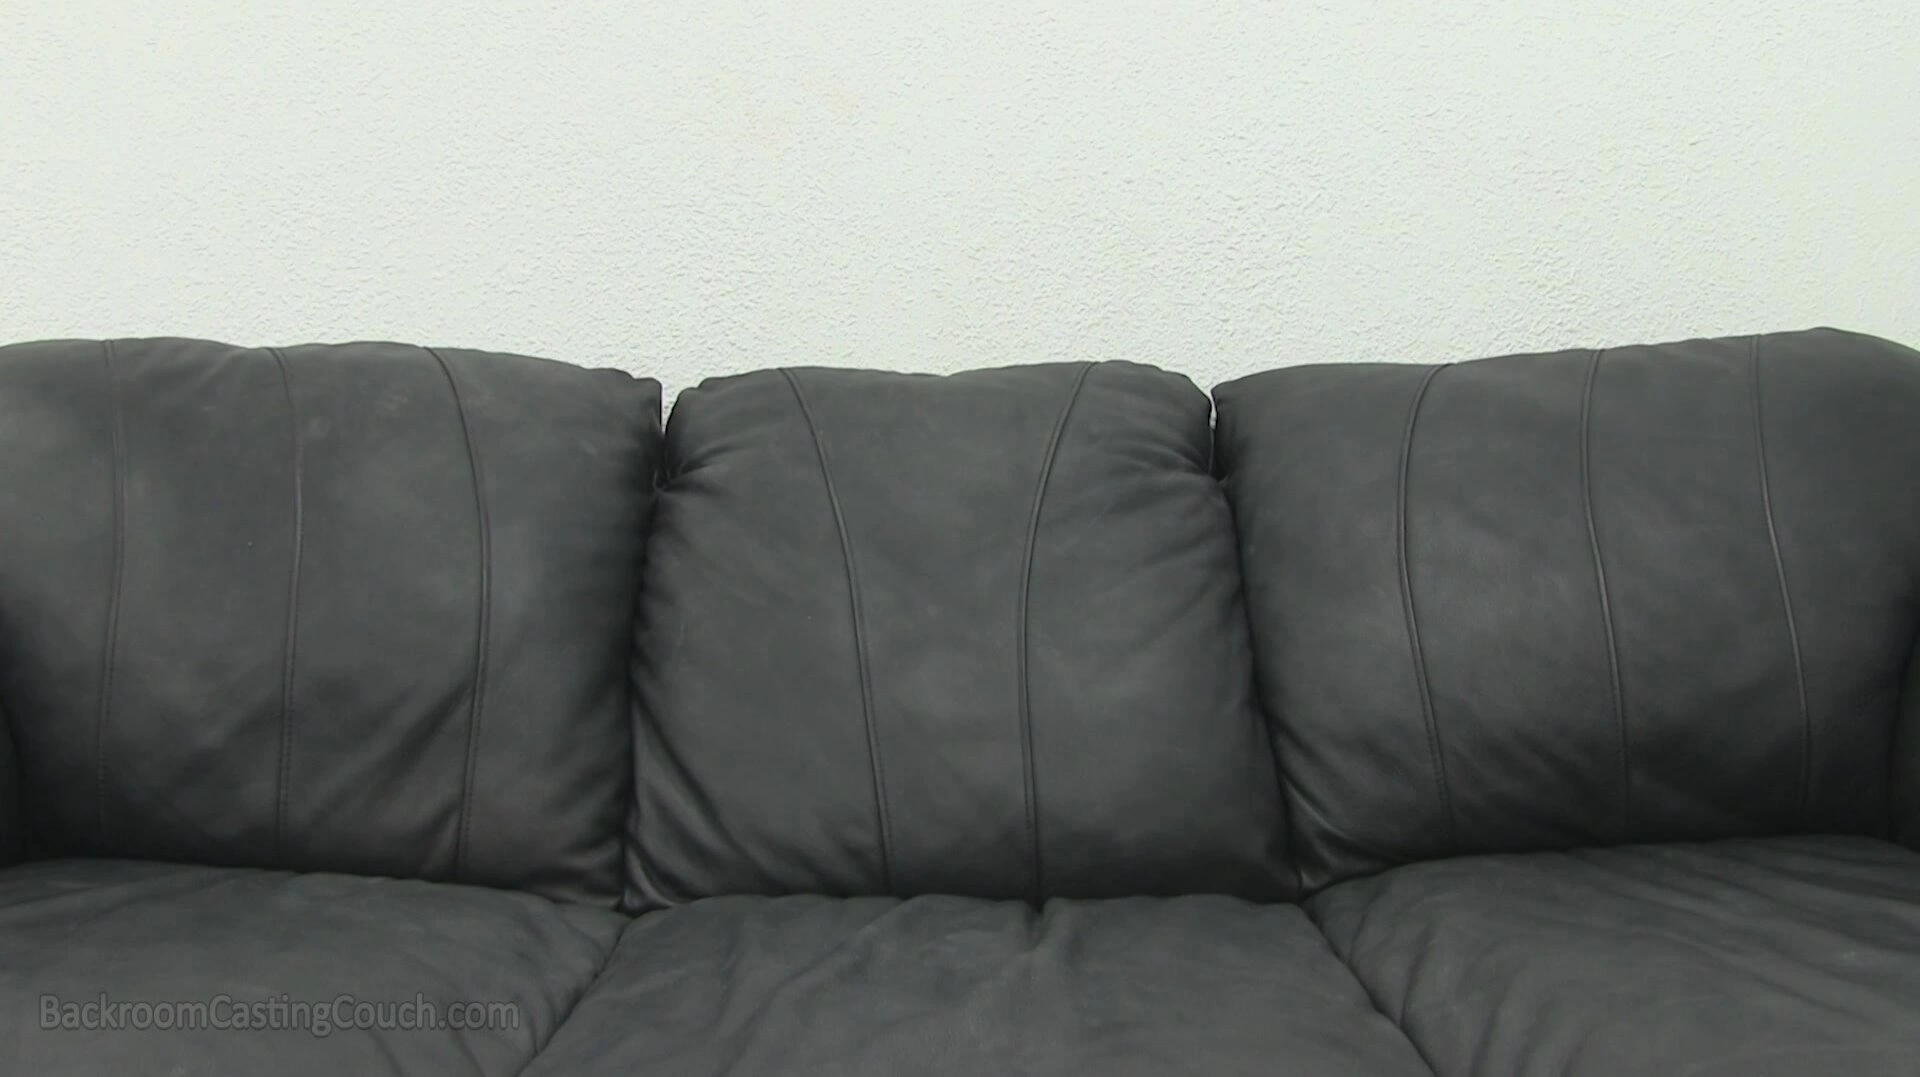 christian rodrigez add photo backroom casting couch password